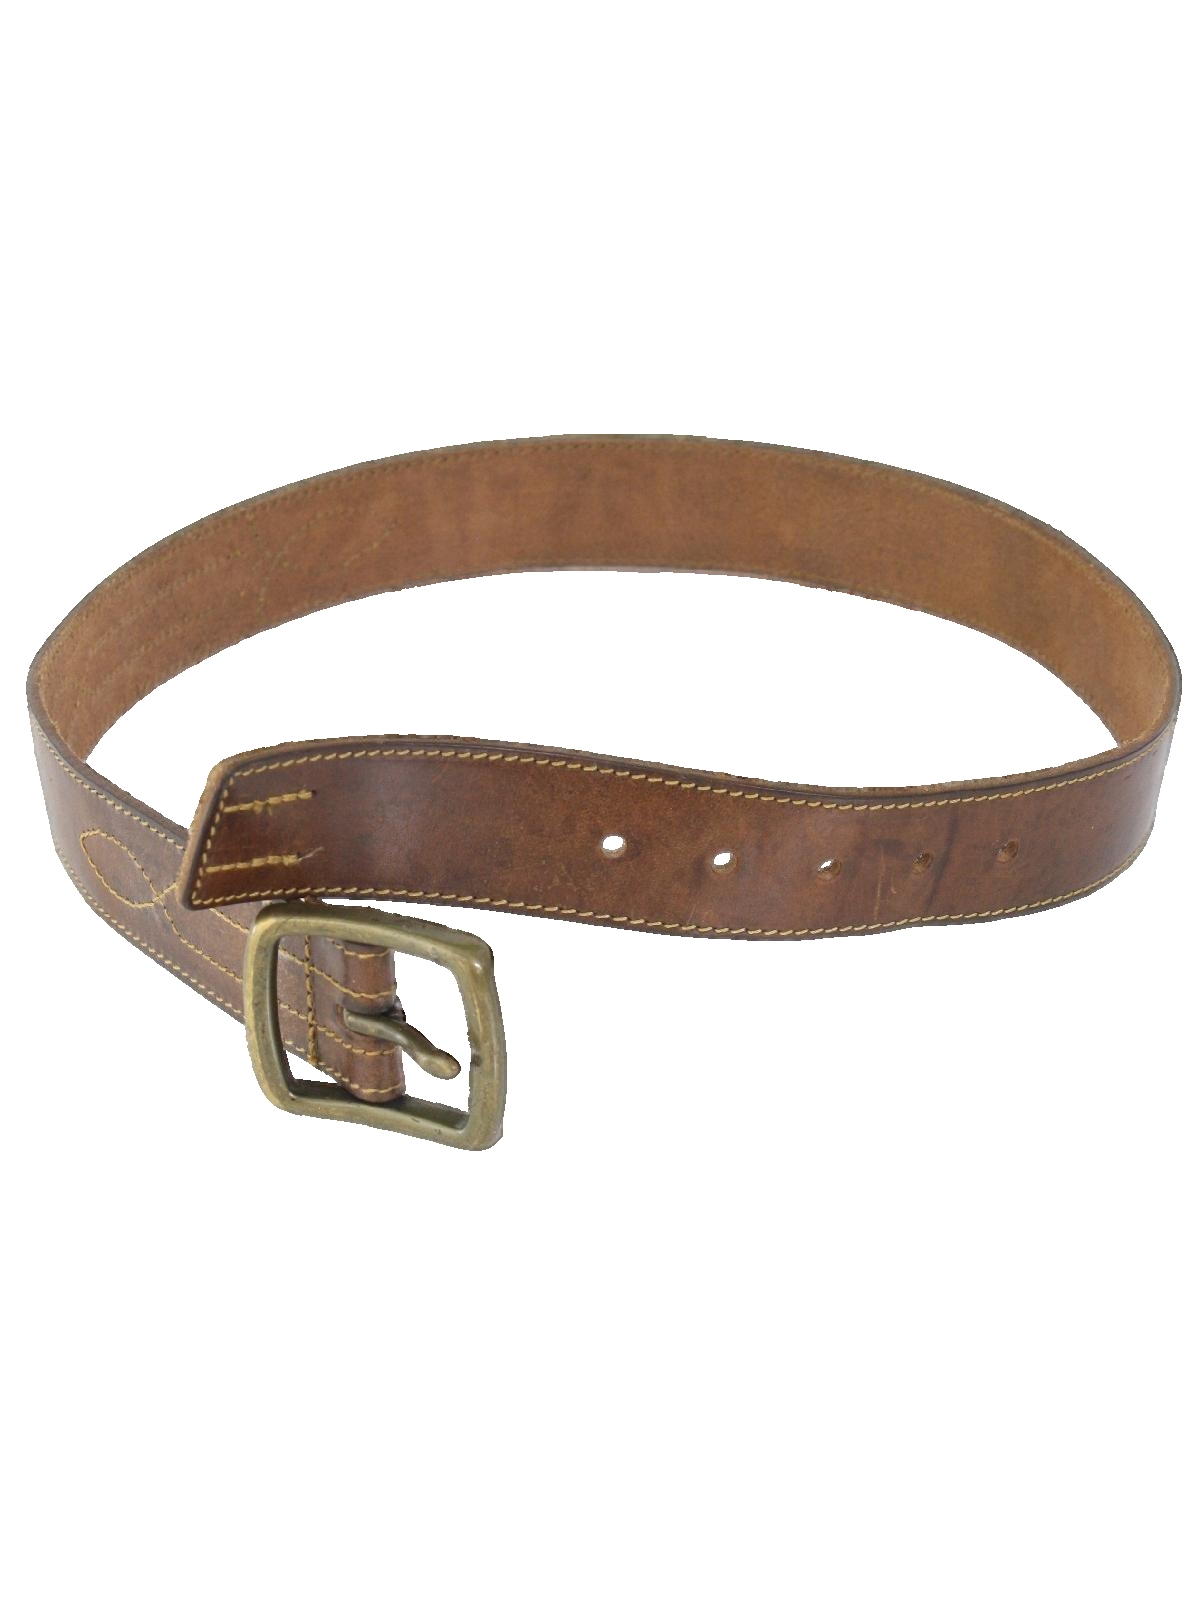 80s Belt (Made in USA): Late 80s or Early 90s -Made in USA- Mens brown ...